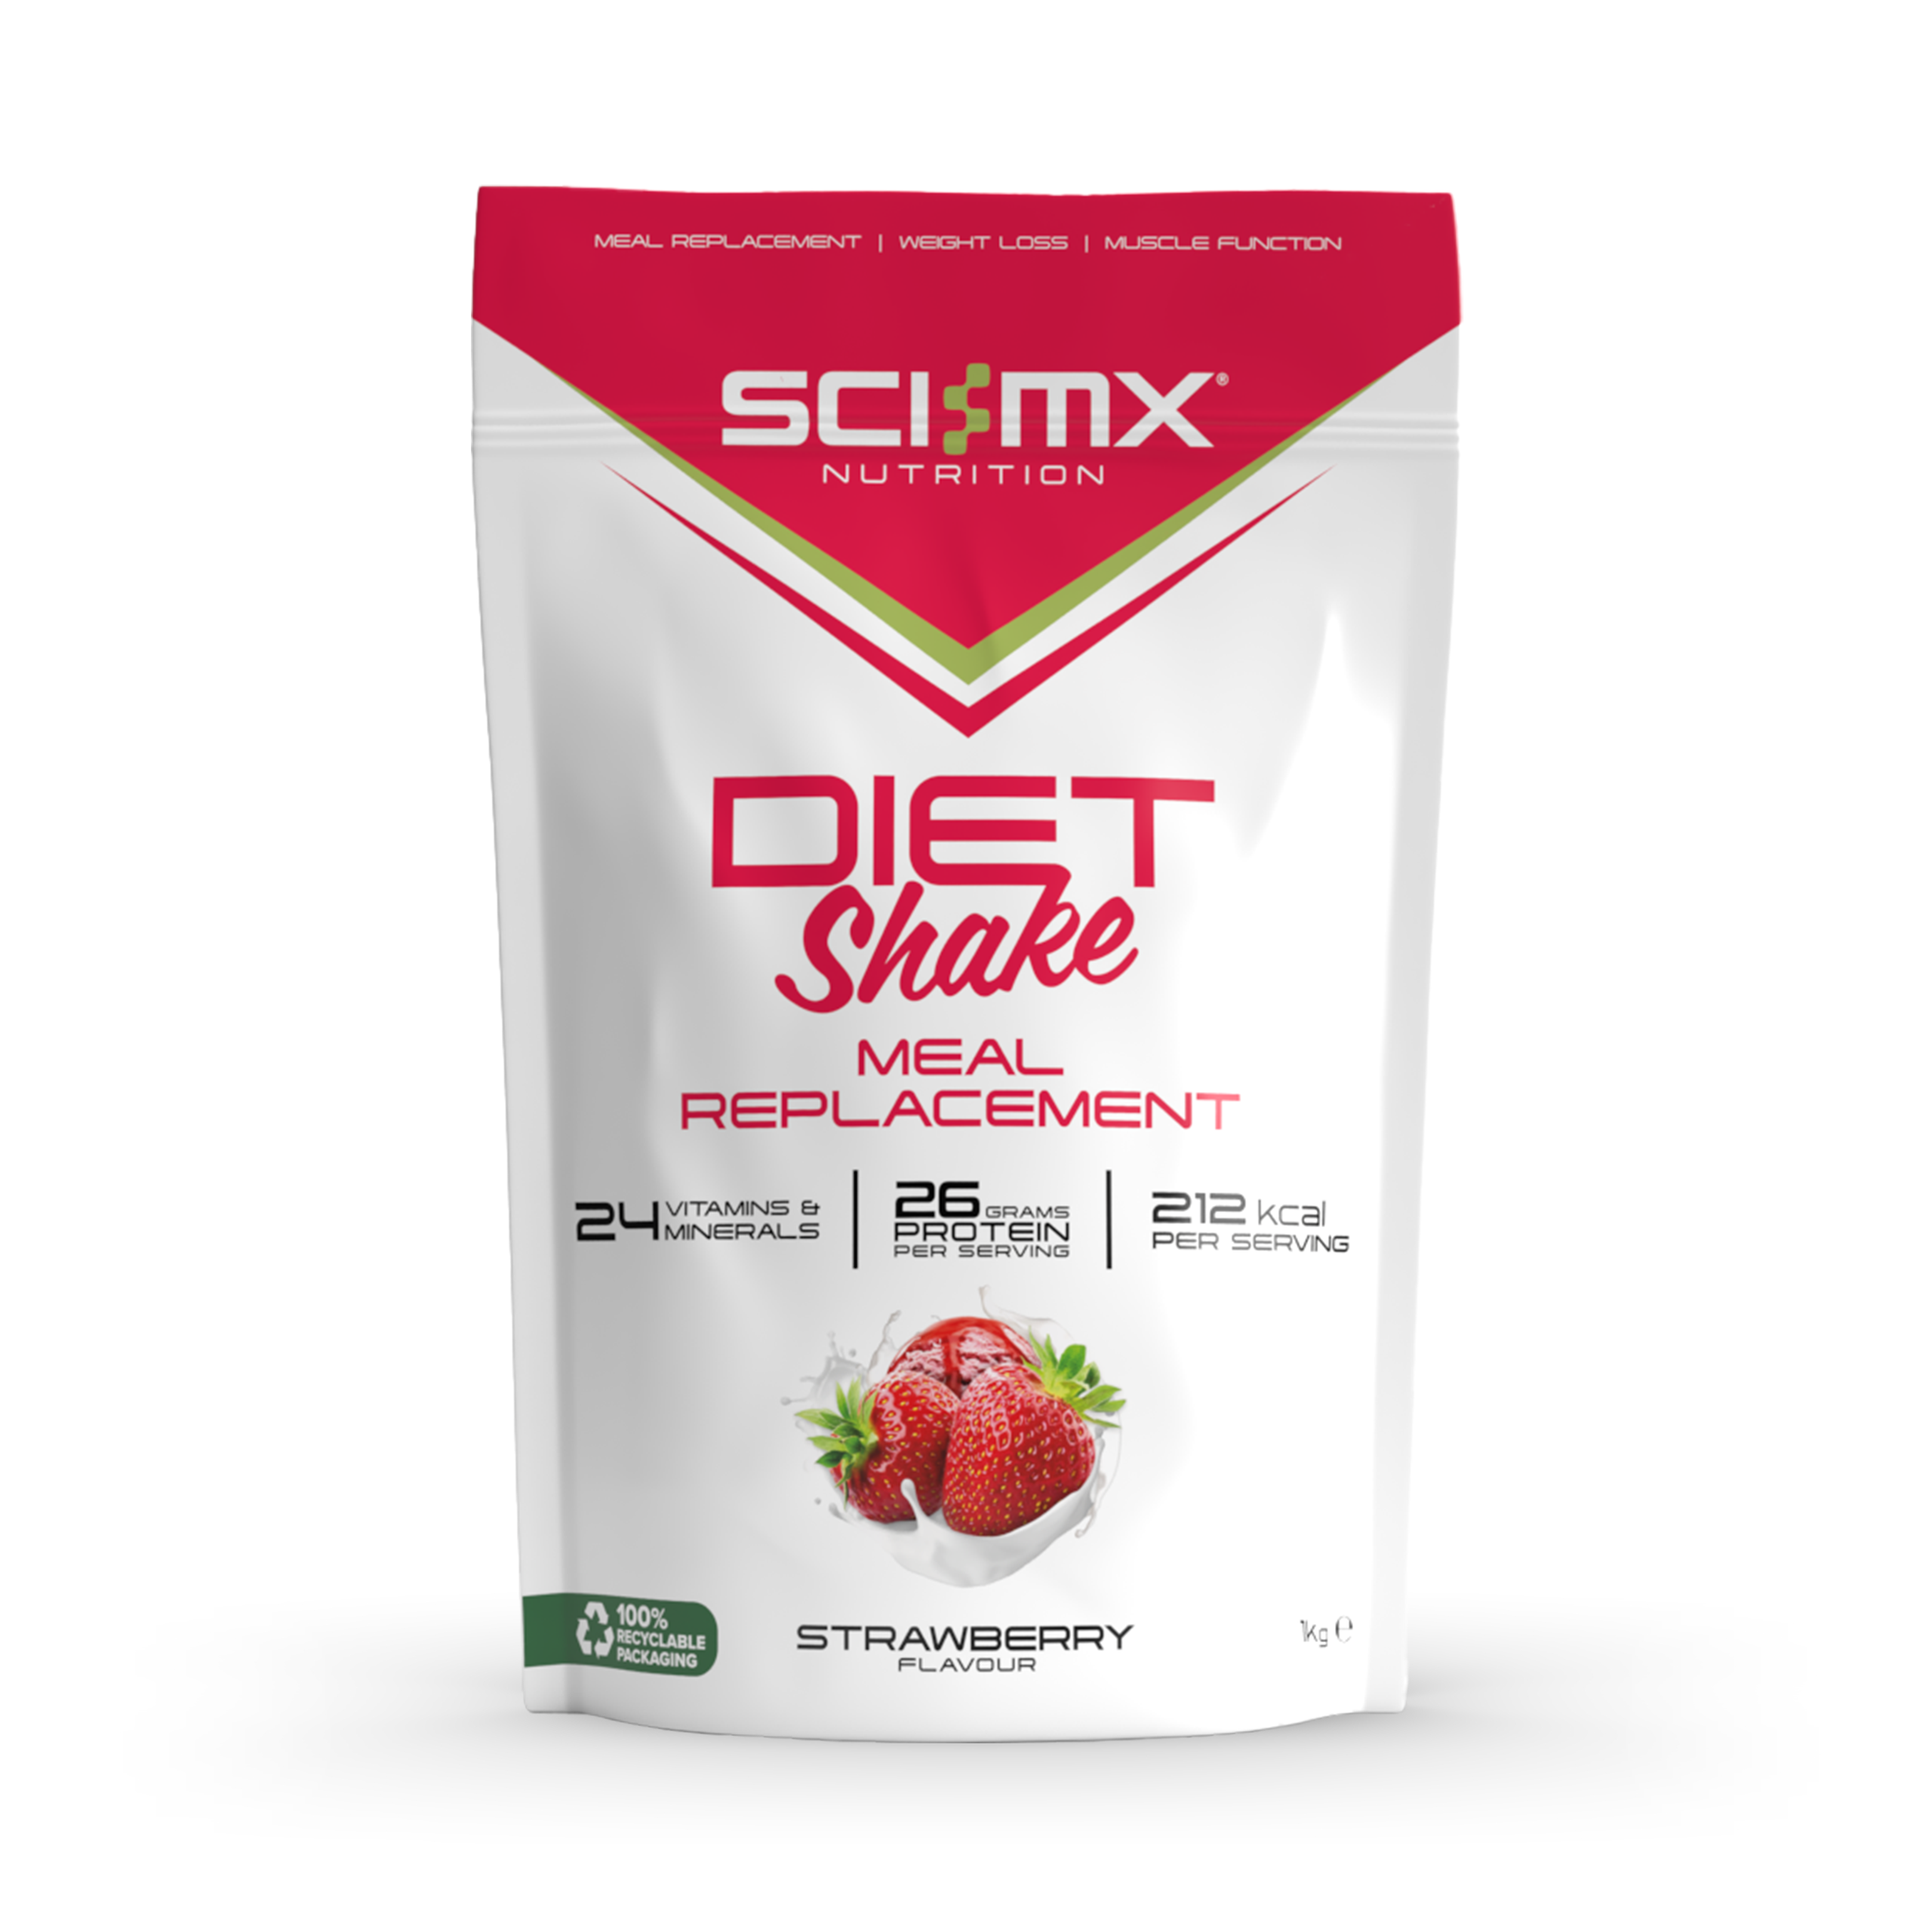 MEAL REPLACEMENT SHAKE